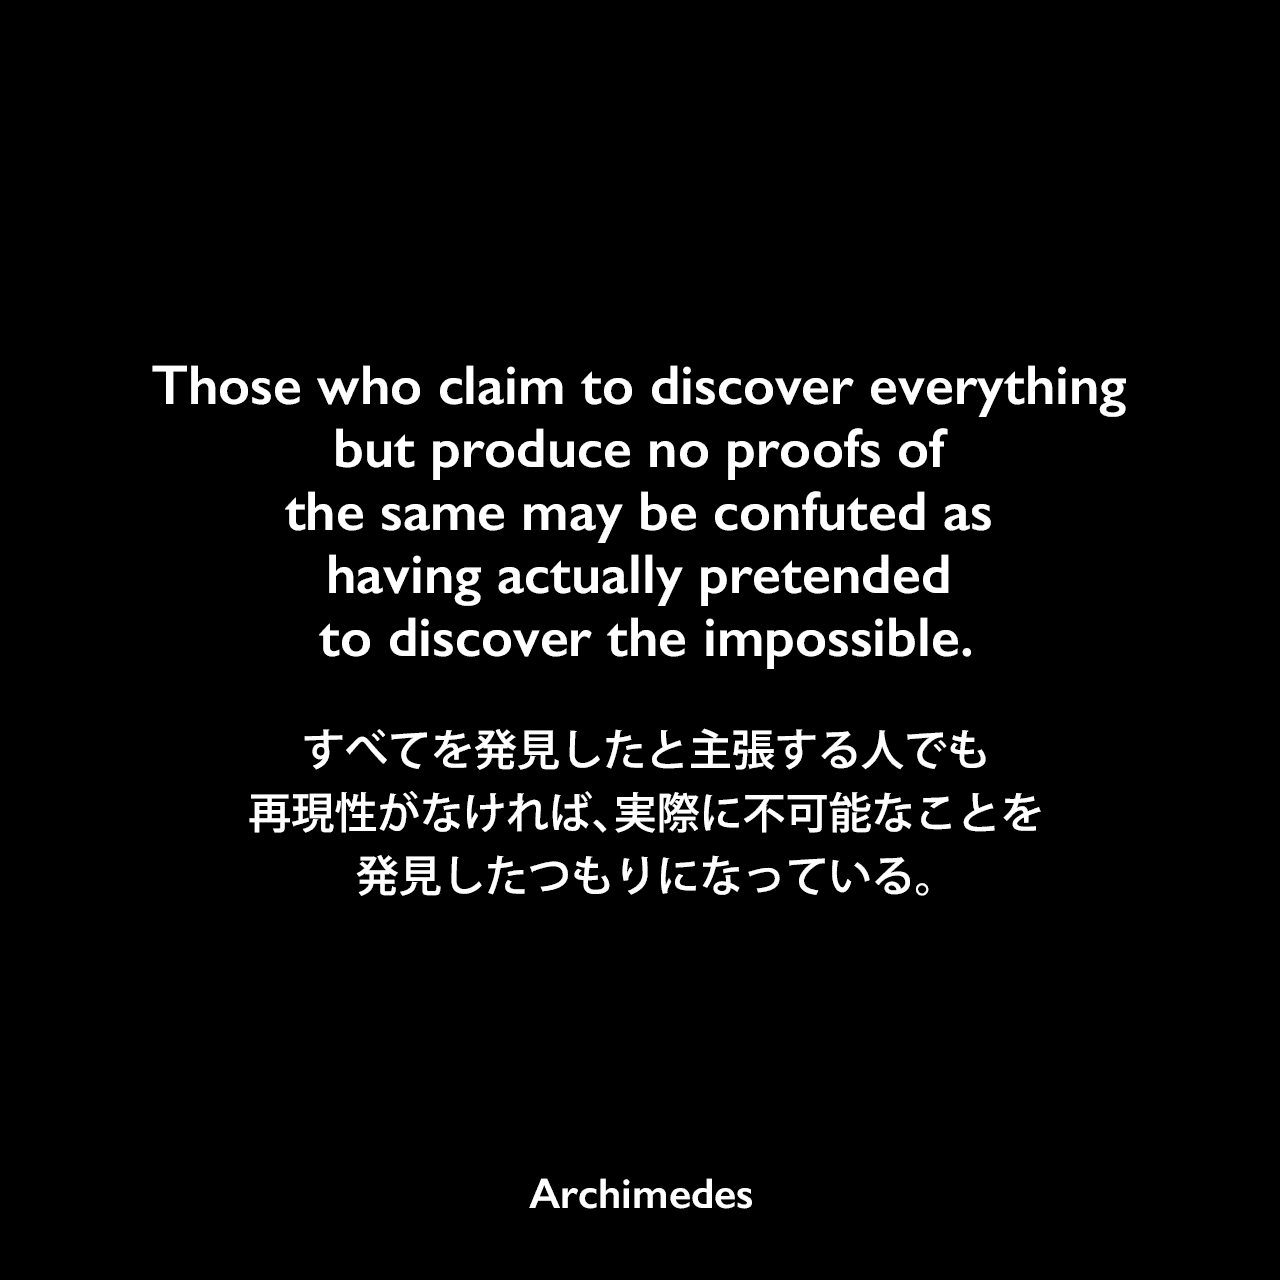 Those who claim to discover everything but produce no proofs of the same may be confuted as having actually pretended to discover the impossible.すべてを発見したと主張する人でも、再現性がなければ、実際に不可能なことを発見したつもりになっている。- アルキメデスの論文「On Spirals」よりArchimedes